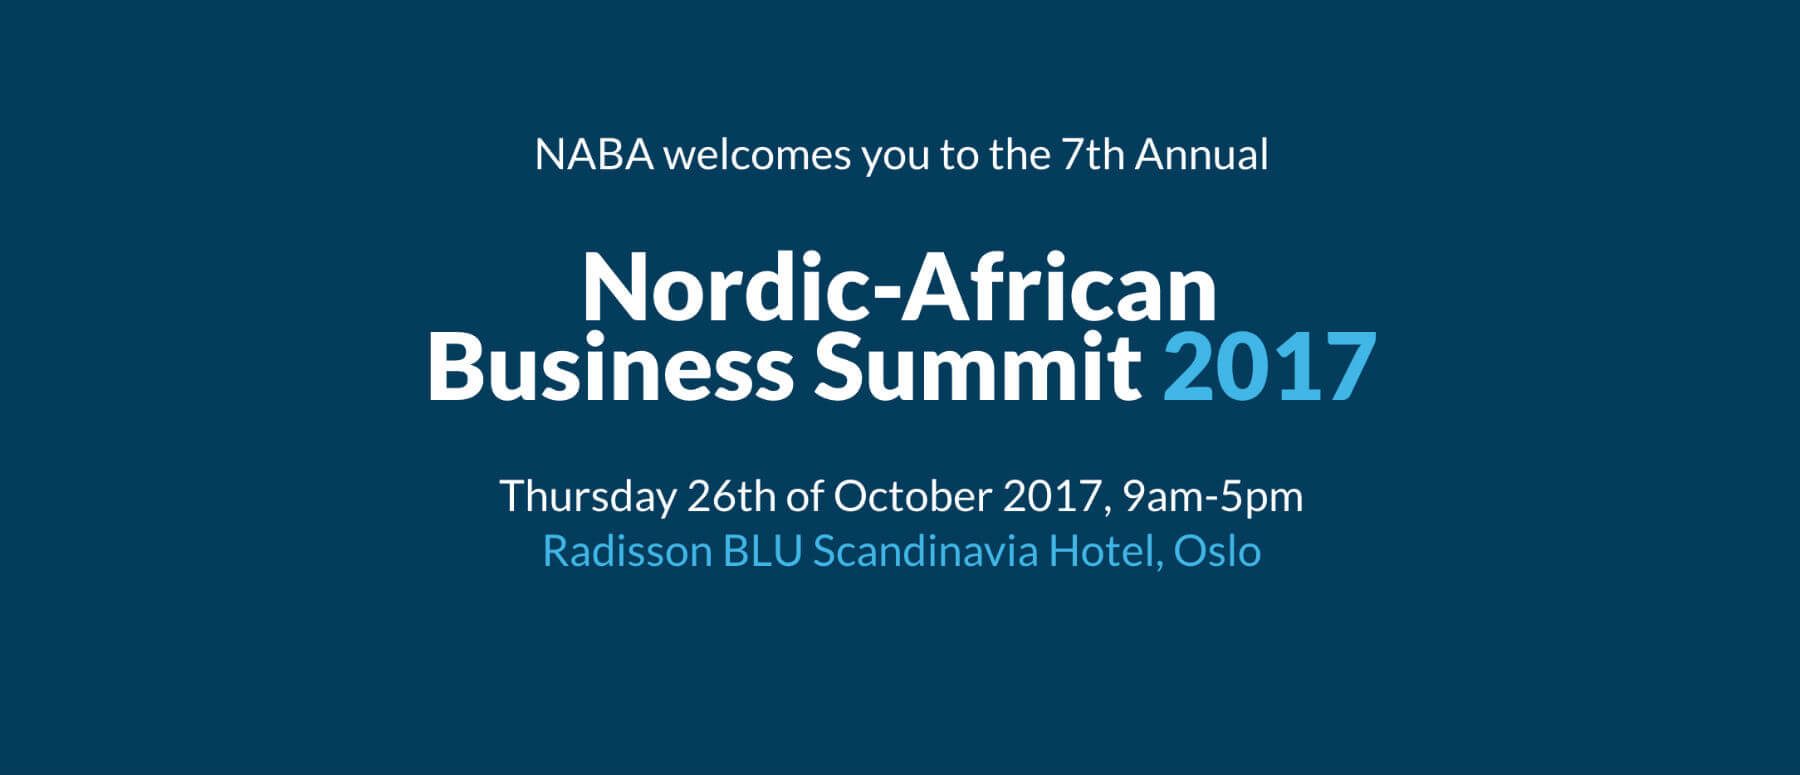 Promo poster of the Nordic-African Business Summit 2017